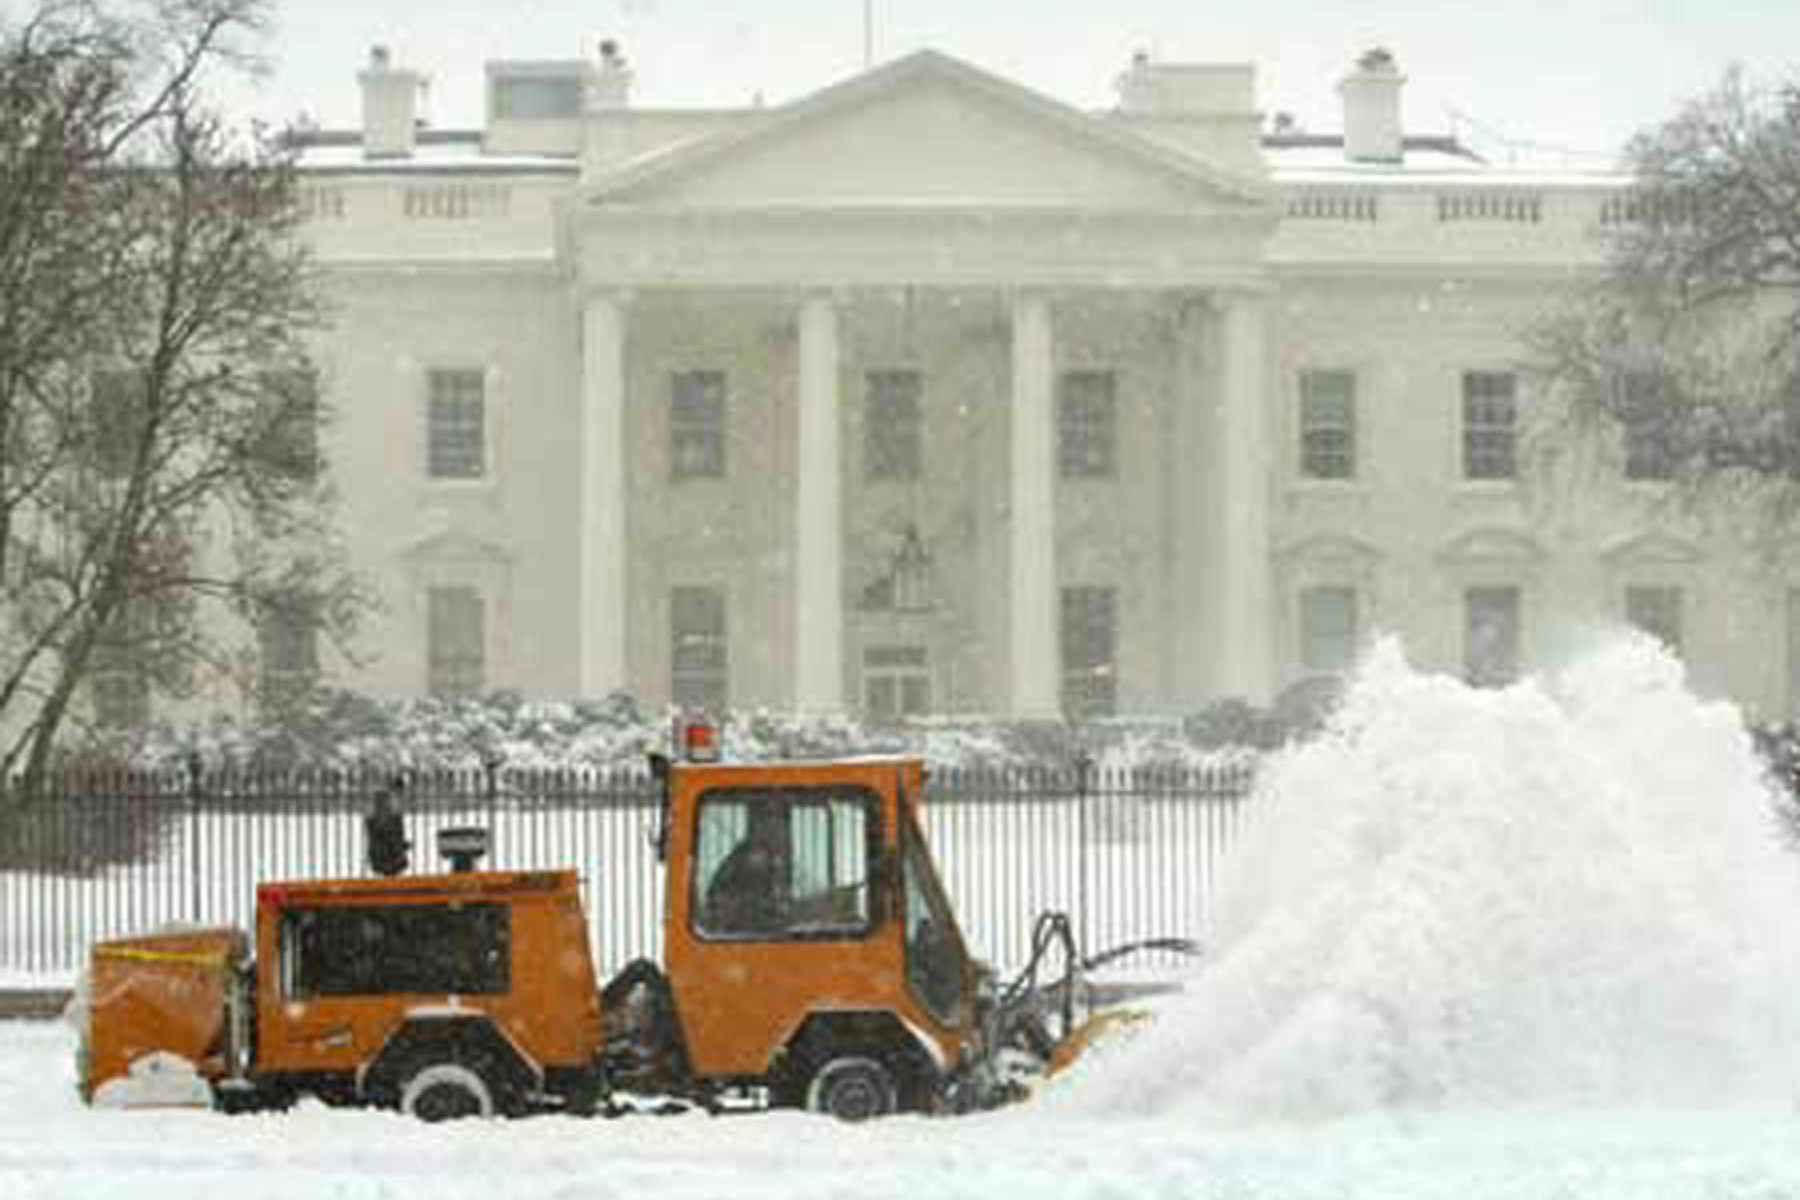 trackless vehicles mt5 tractor machine and power angle sweeper sweeping snow in front of the white house